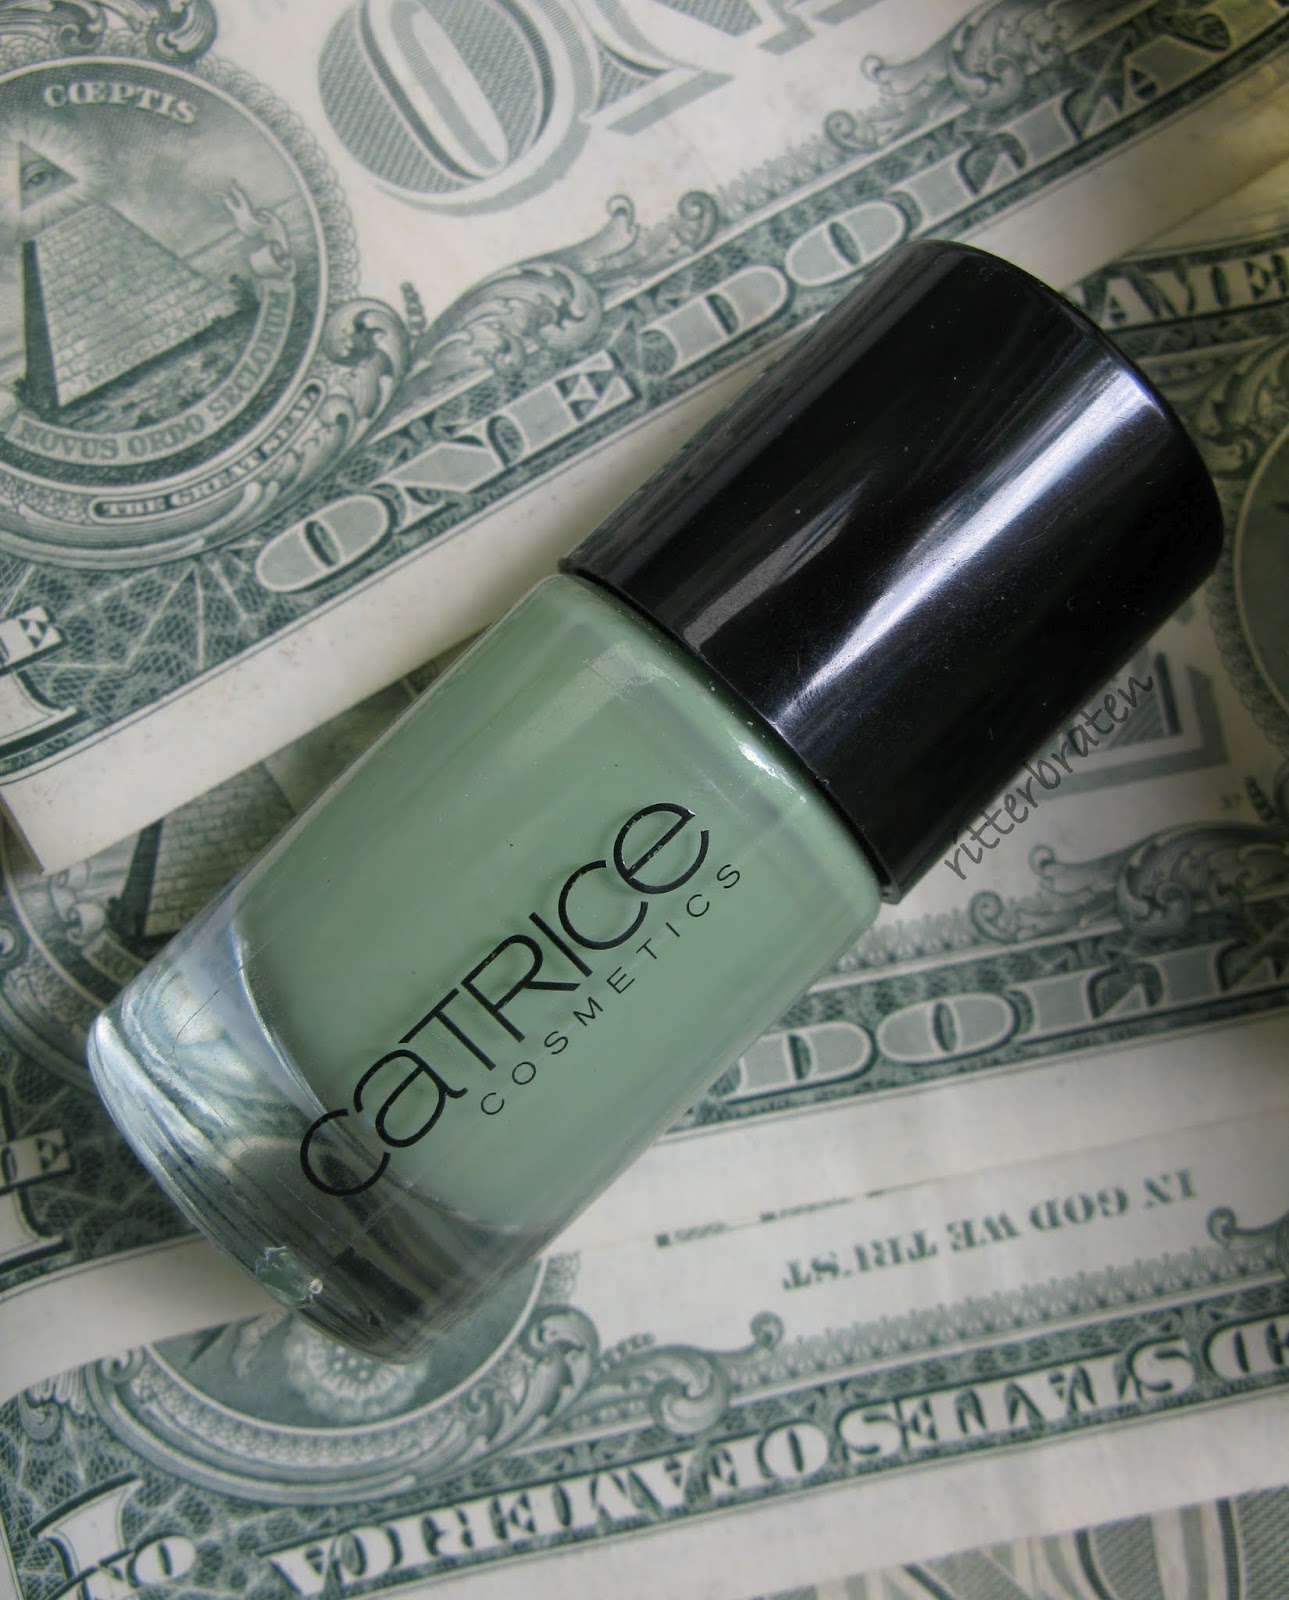 Catrice Sold Out Forever swatch nail polish